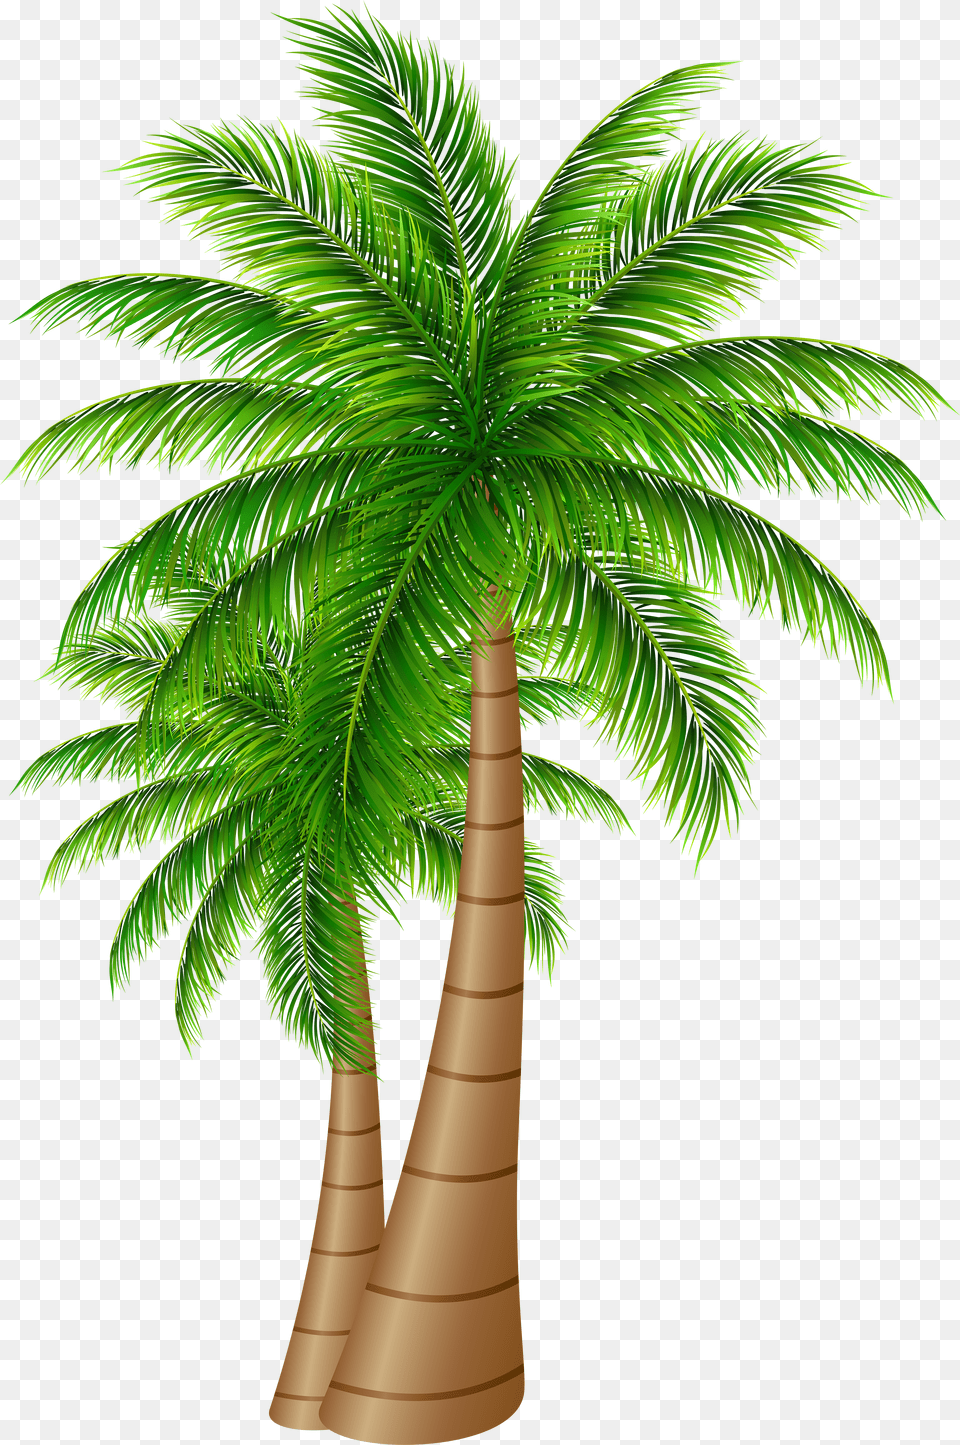 Library Of Date Palm Tree Transparent Background Palm Tree Png